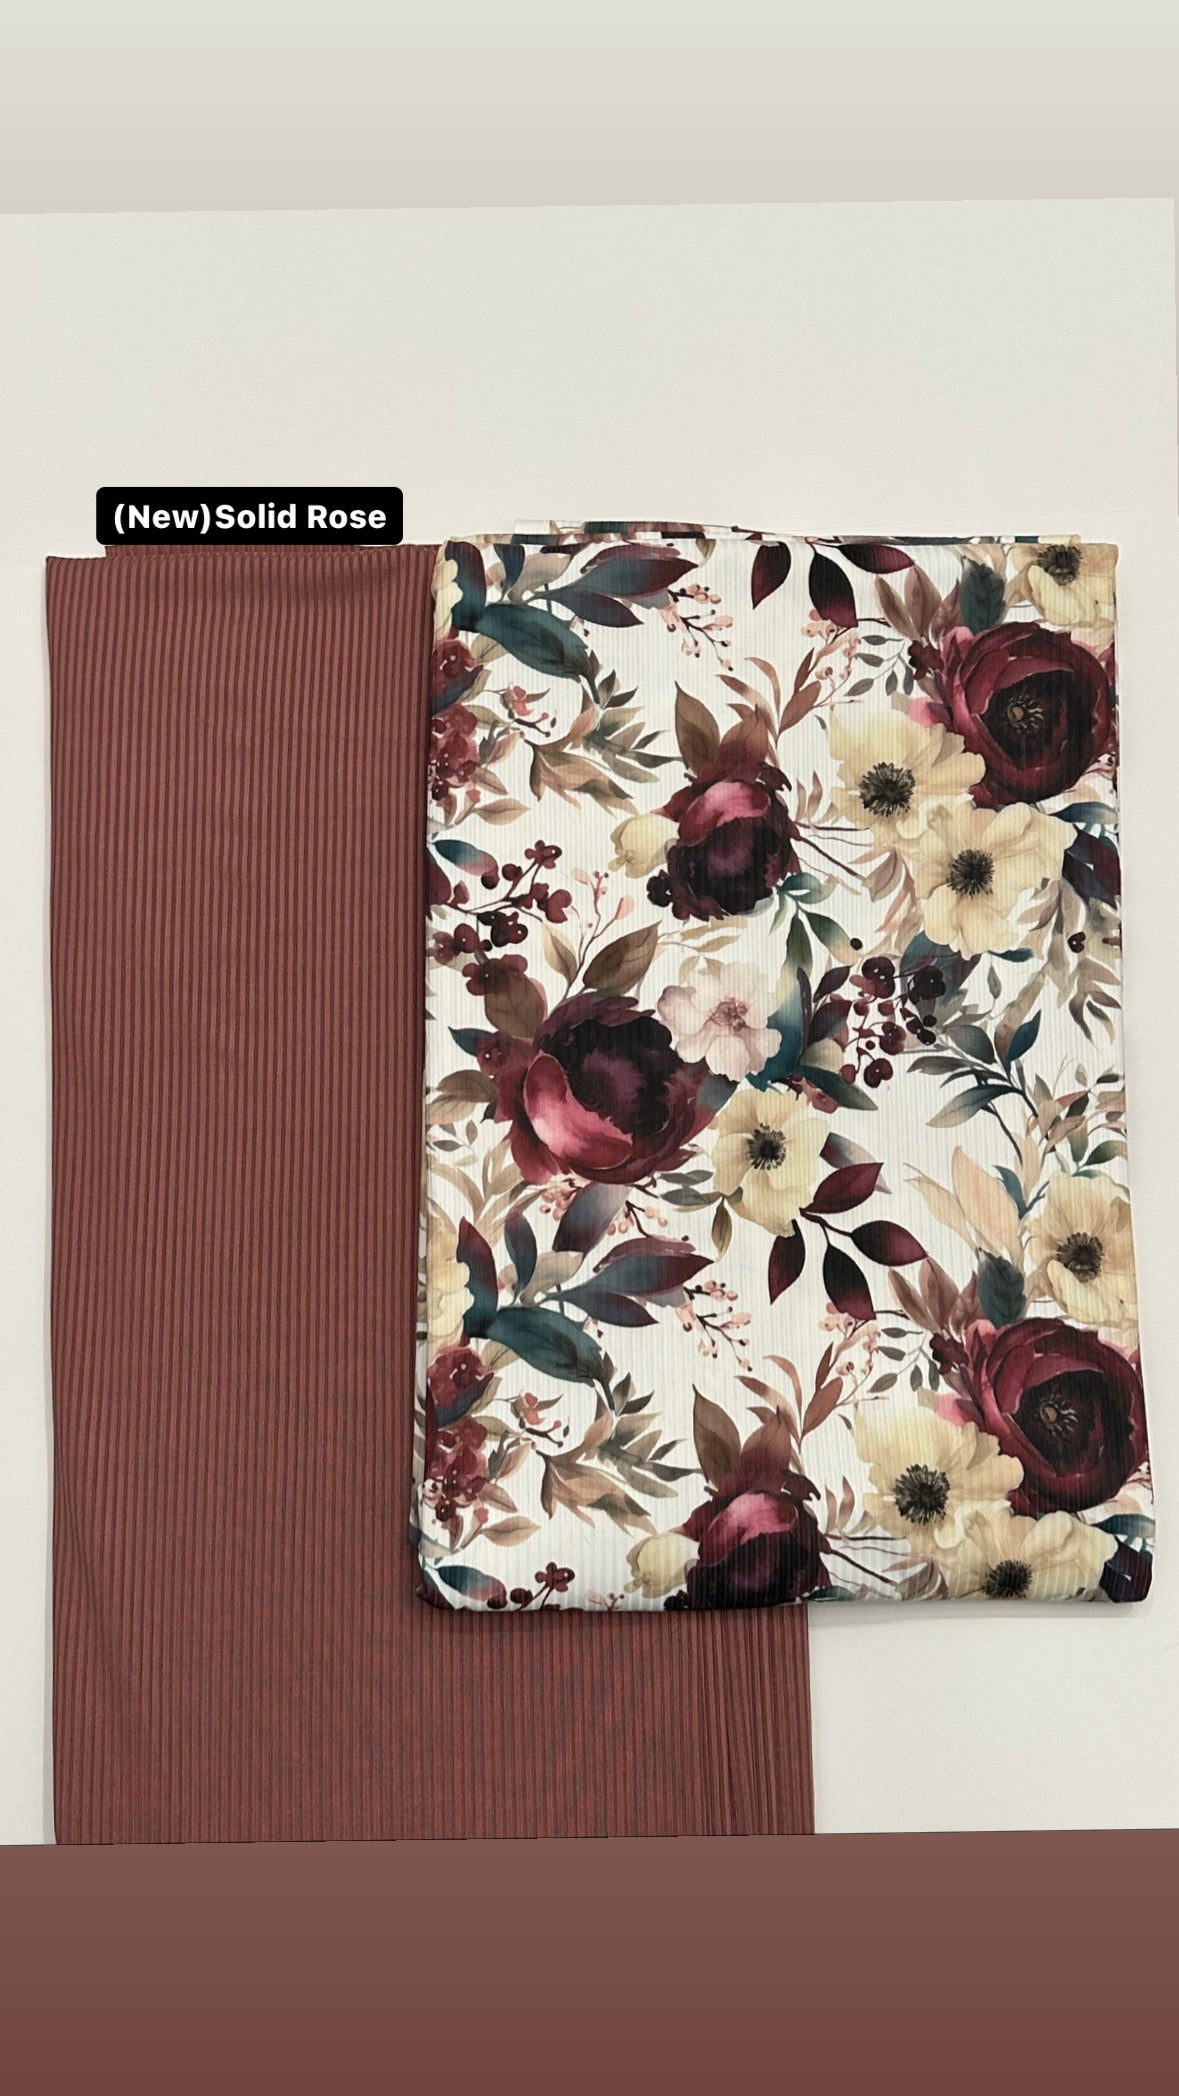 Gertie Floral on Unbrushed Rib Knit Fabric Sold by the 1/4 yard